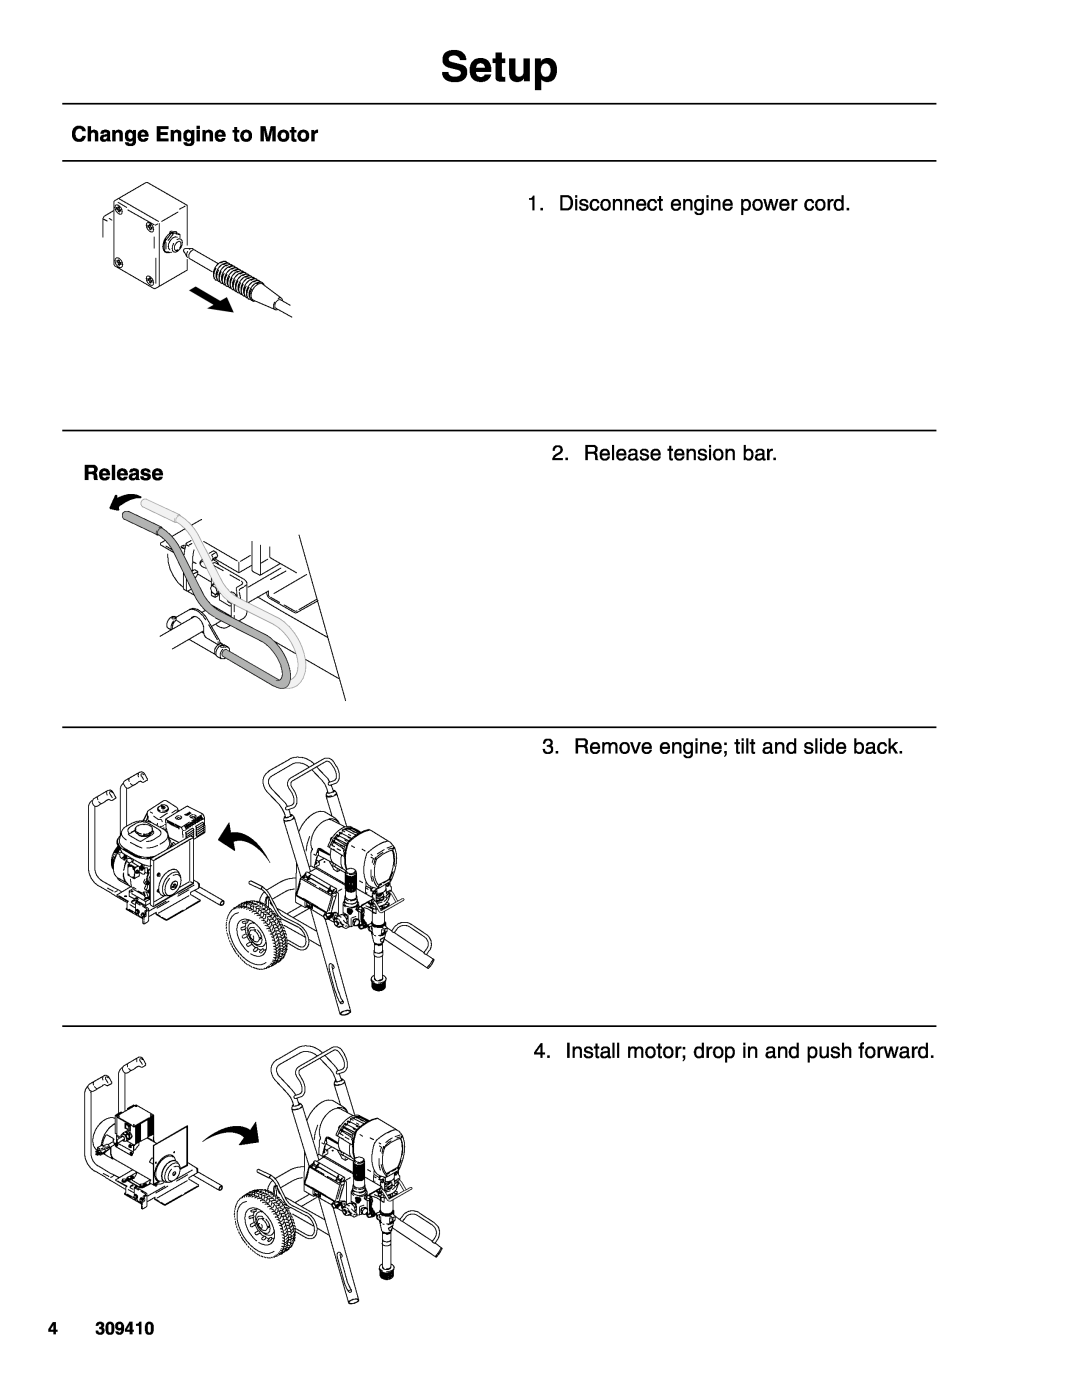 Graco Inc 309410 manual Setup, Change Engine to Motor, Disconnect engine power cord 2. Release tension bar 